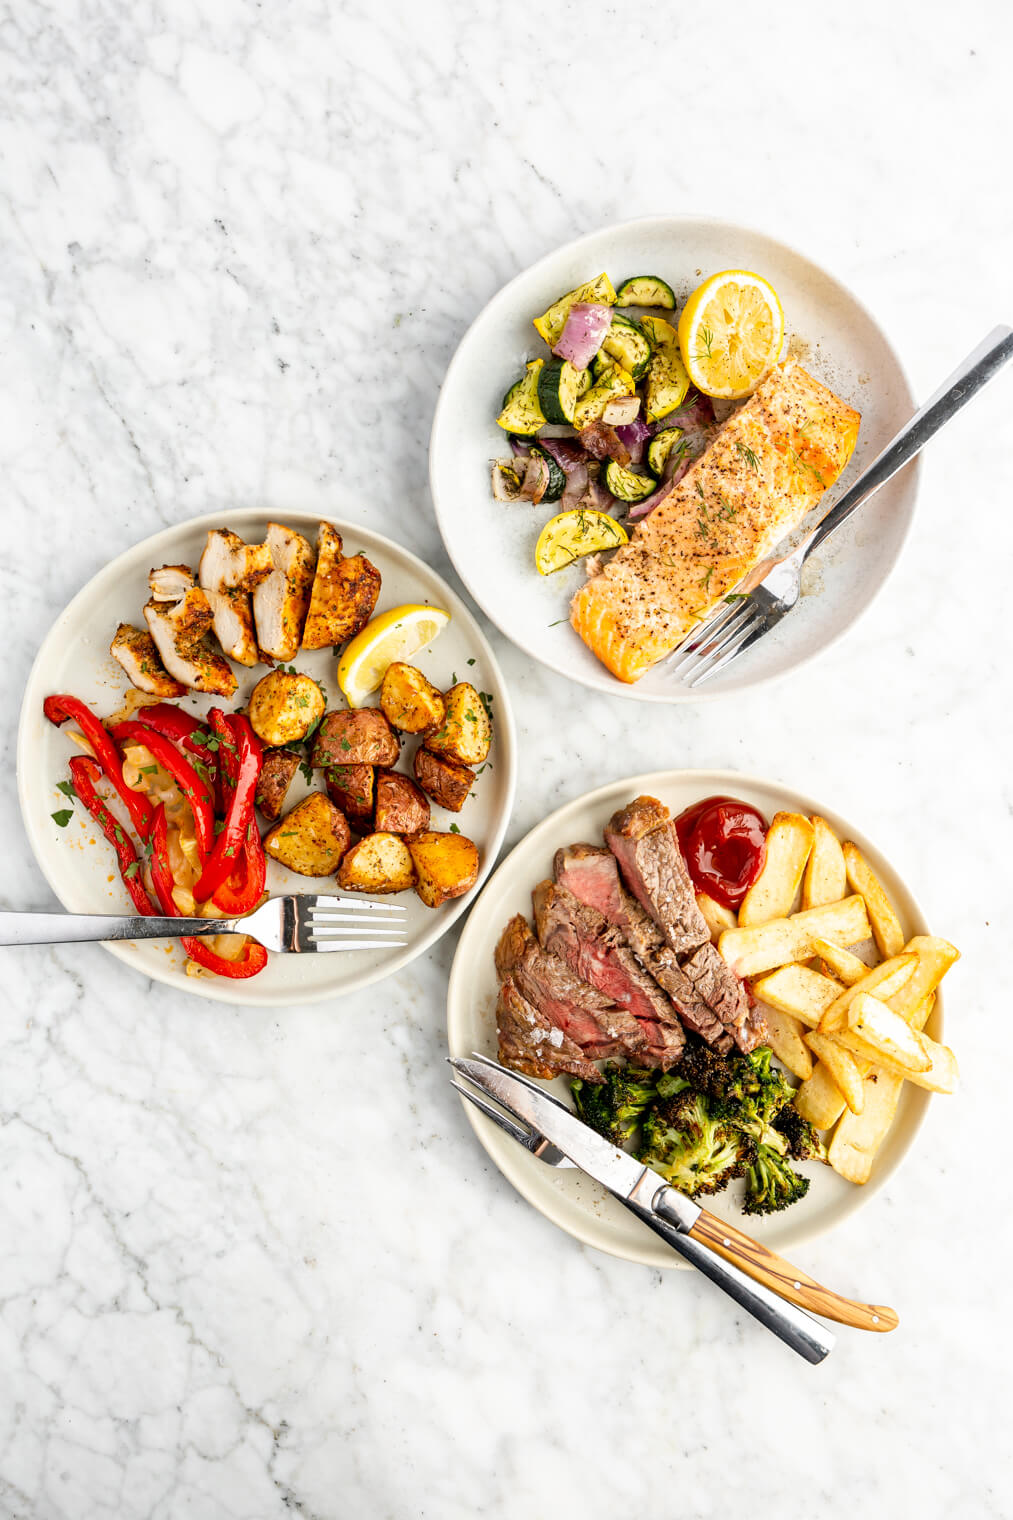 Top down view of three plated air fryer dinners on a gray and white marble surface.